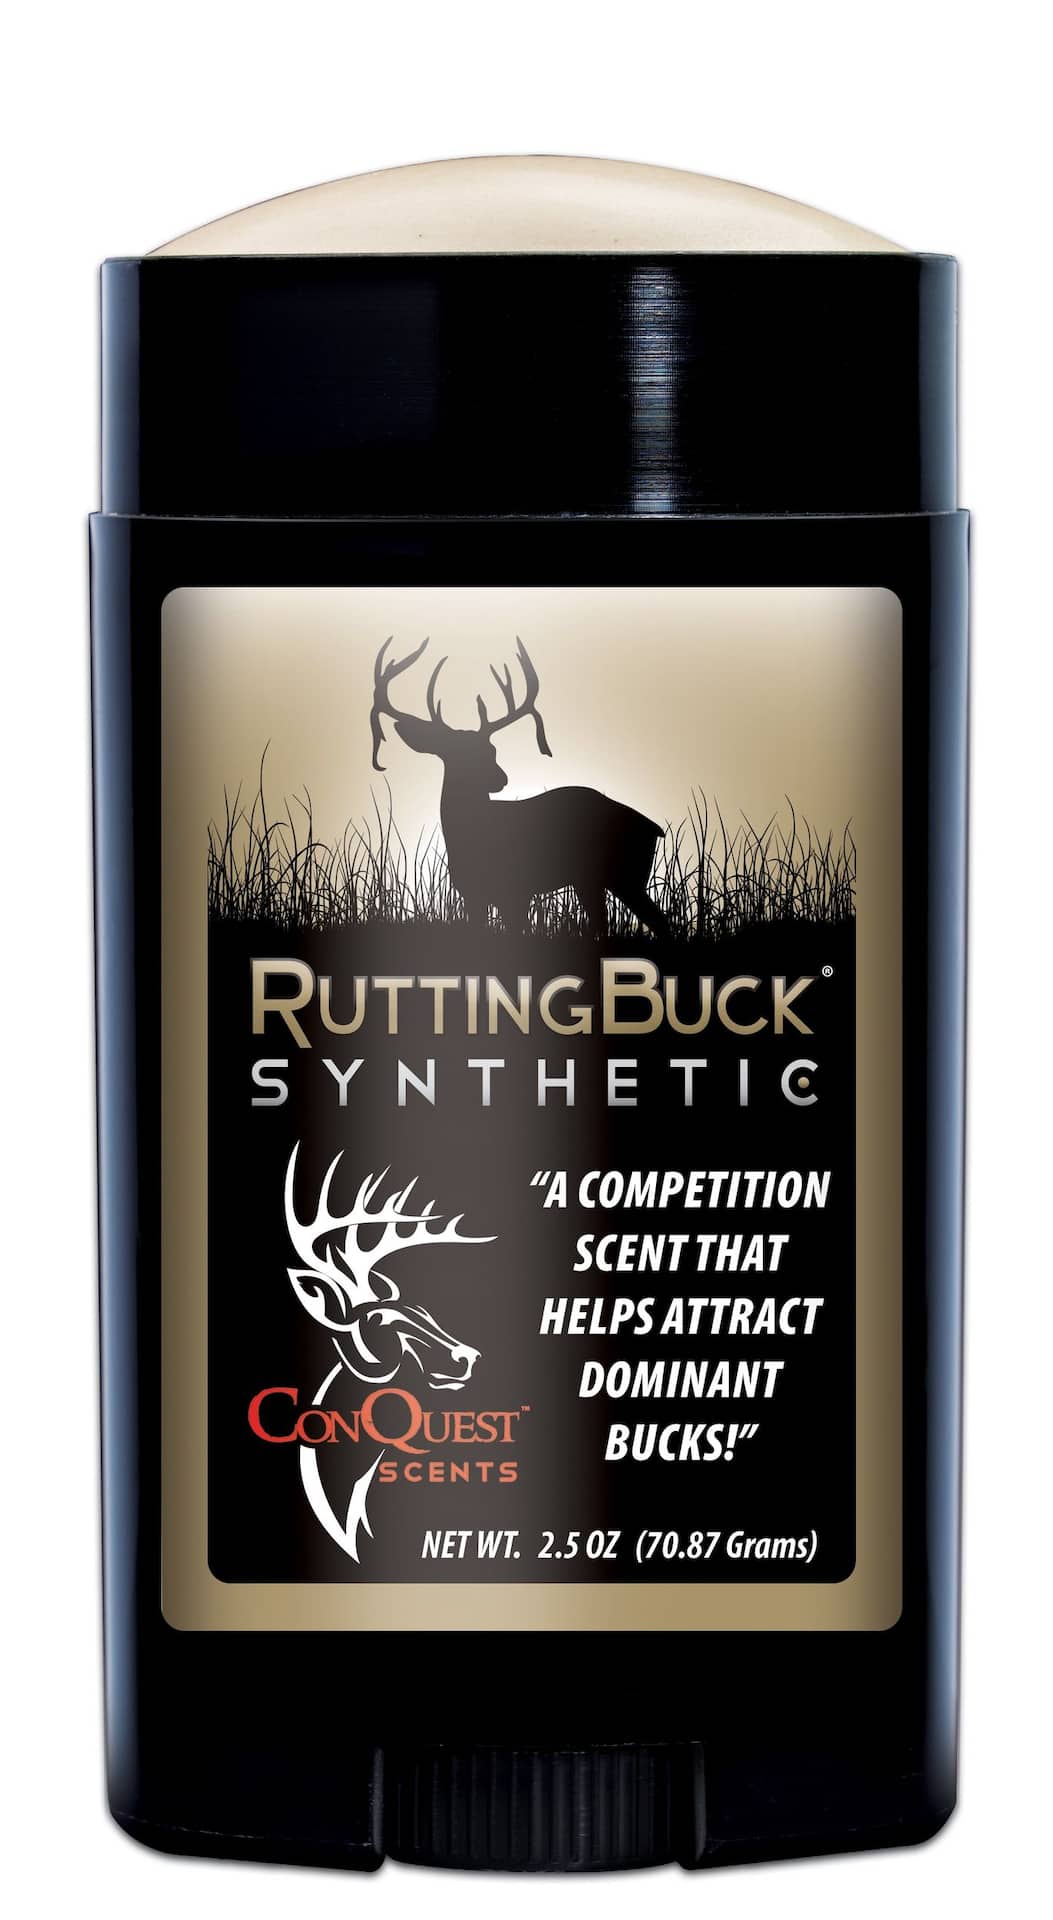 Conquest Scents Rutting Buck Scent Stick for Sale, Online Hunting Store